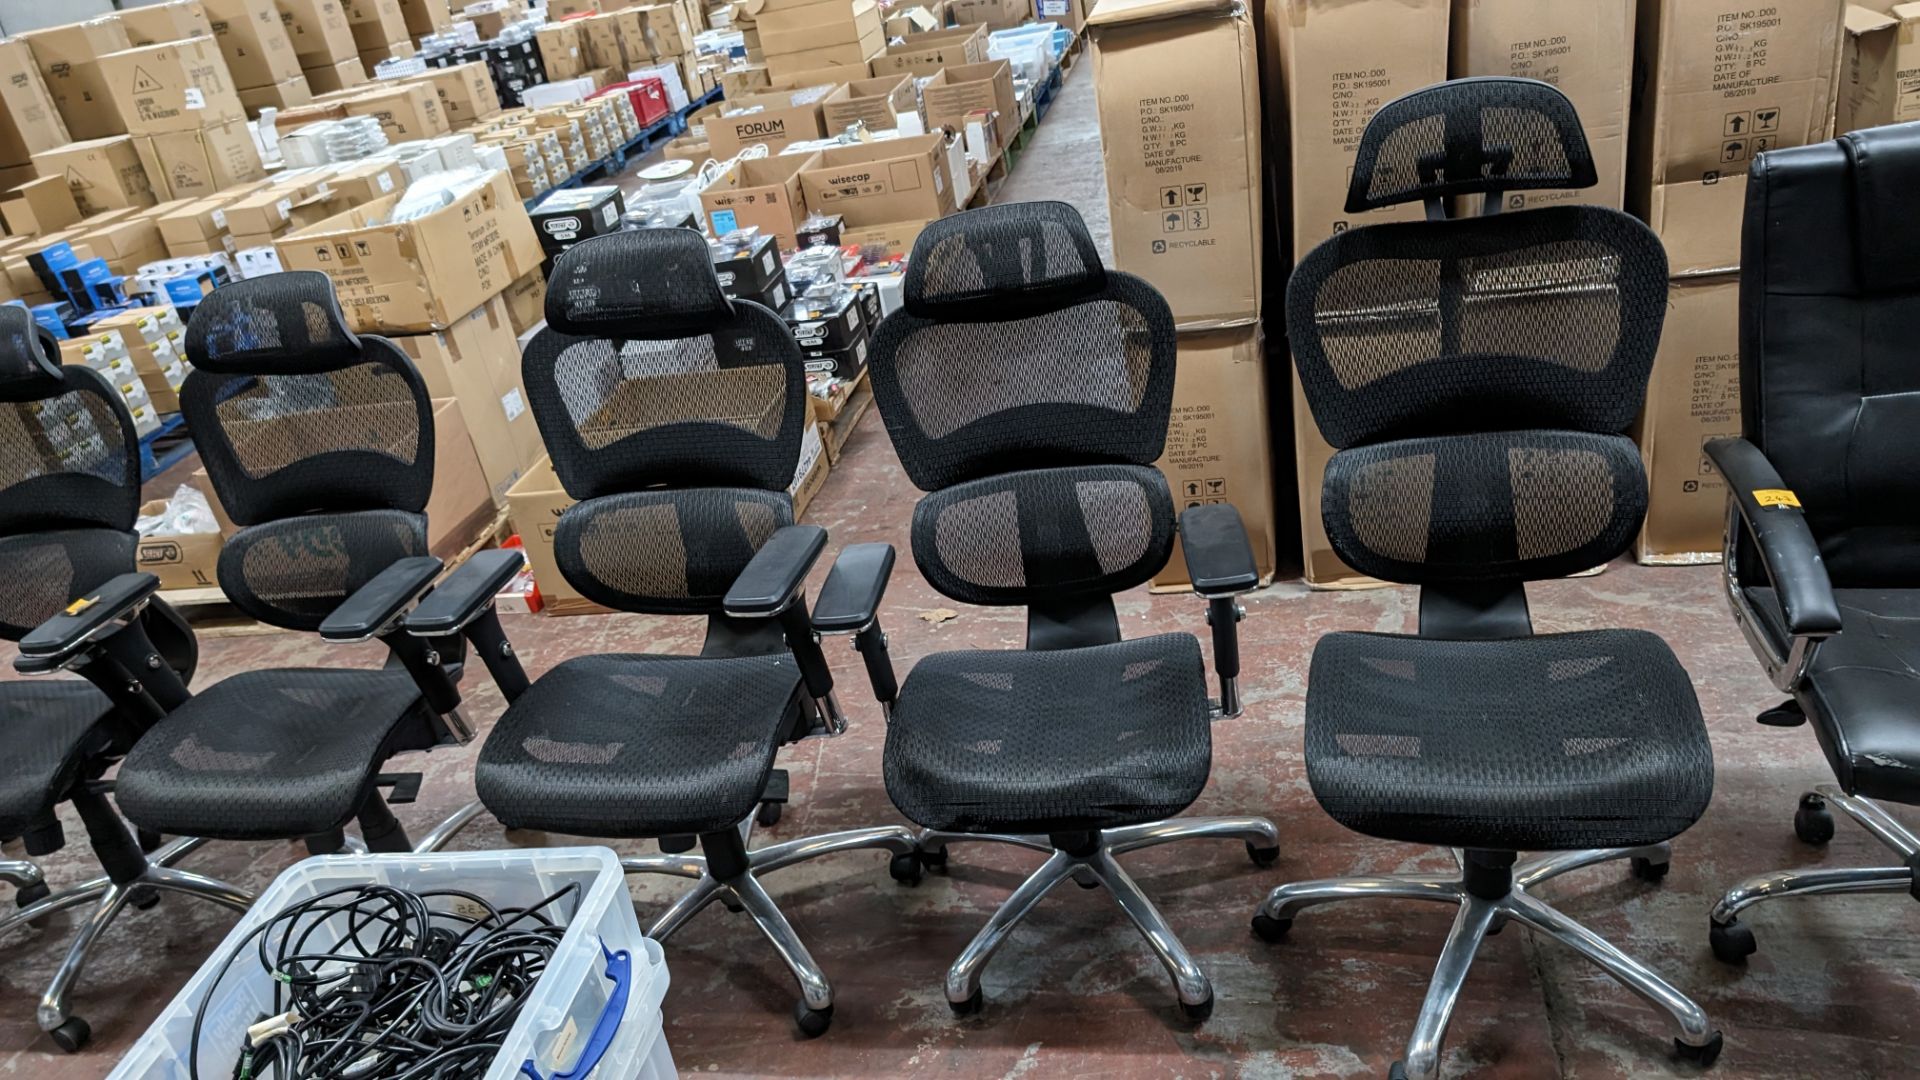 4 off black mesh fabric and chrome modern chairs with arms and headrests. NB: The chairs in lot 24